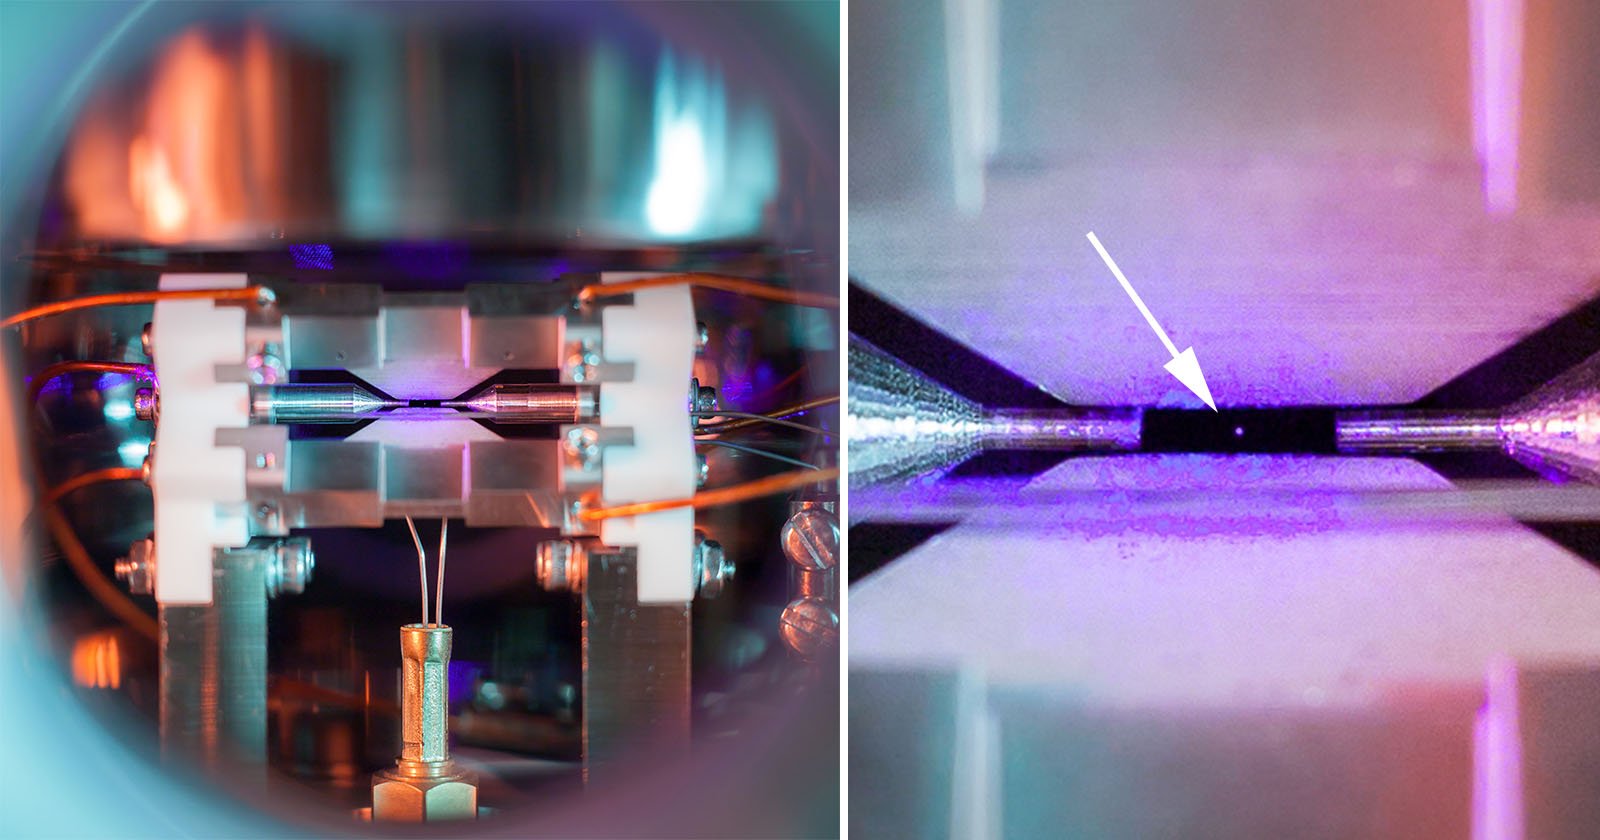 A remarkable photo of a single atom trapped by electric fields has just been awarded the top prize in a well-known science photography competition. Th